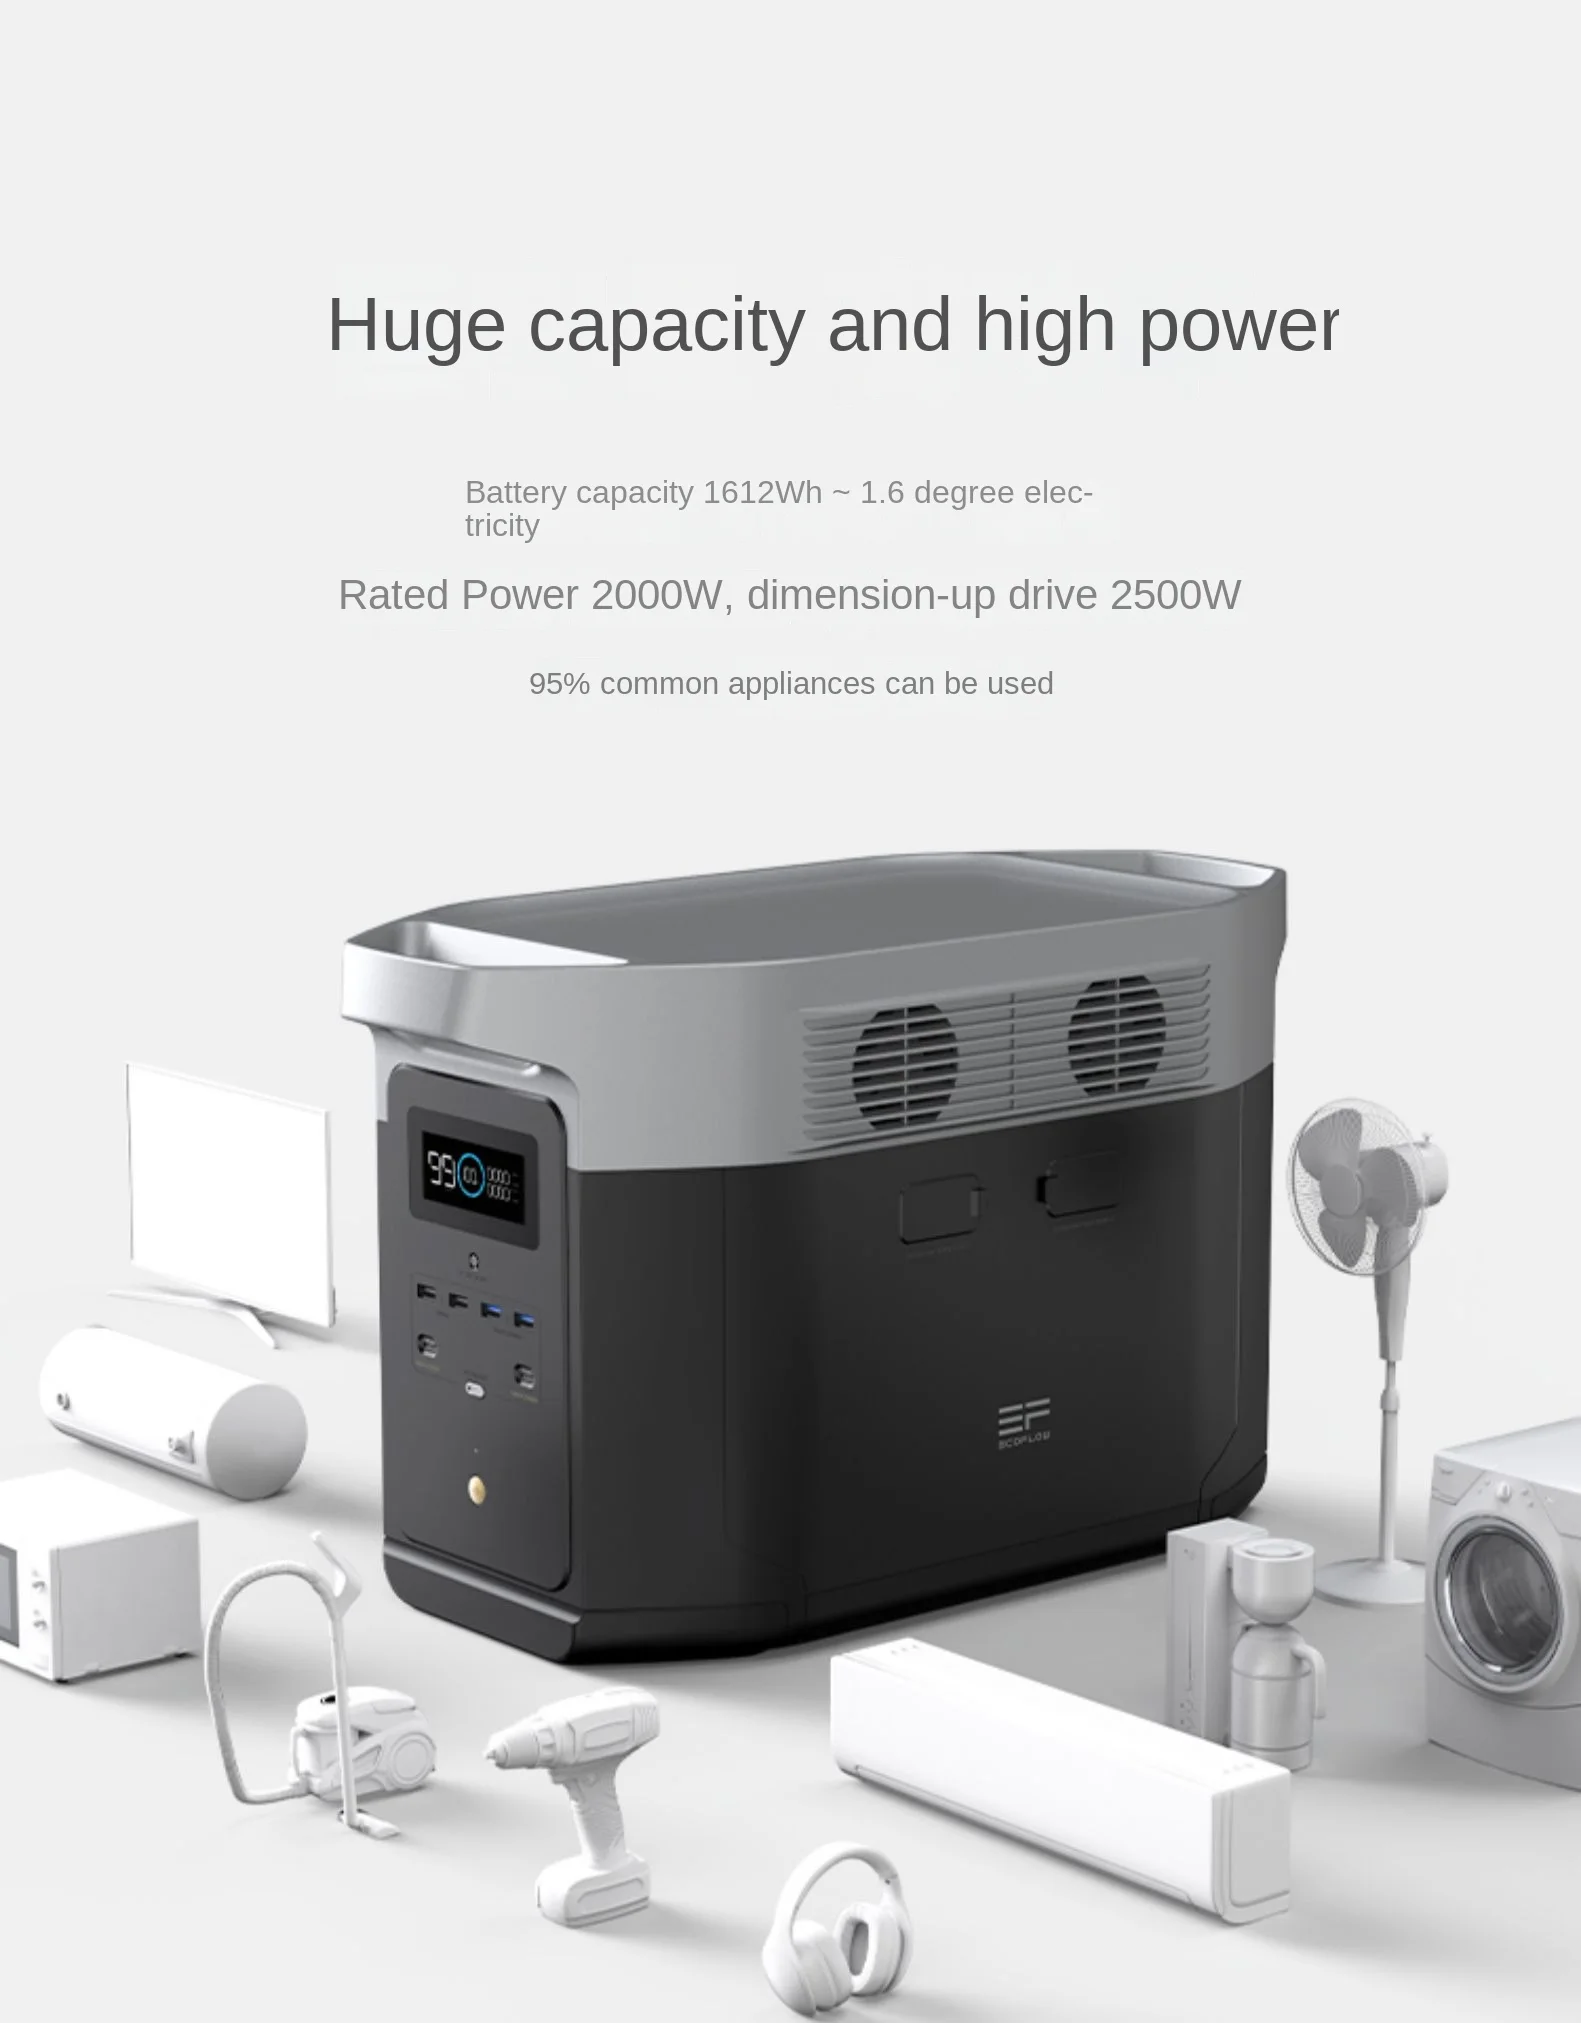 

Portable Power Station ECO flow Outdoor Solar Generator LiFePO4 Battery ECOFLOW DELTA 2000 2400W 2016wh Large Capacity